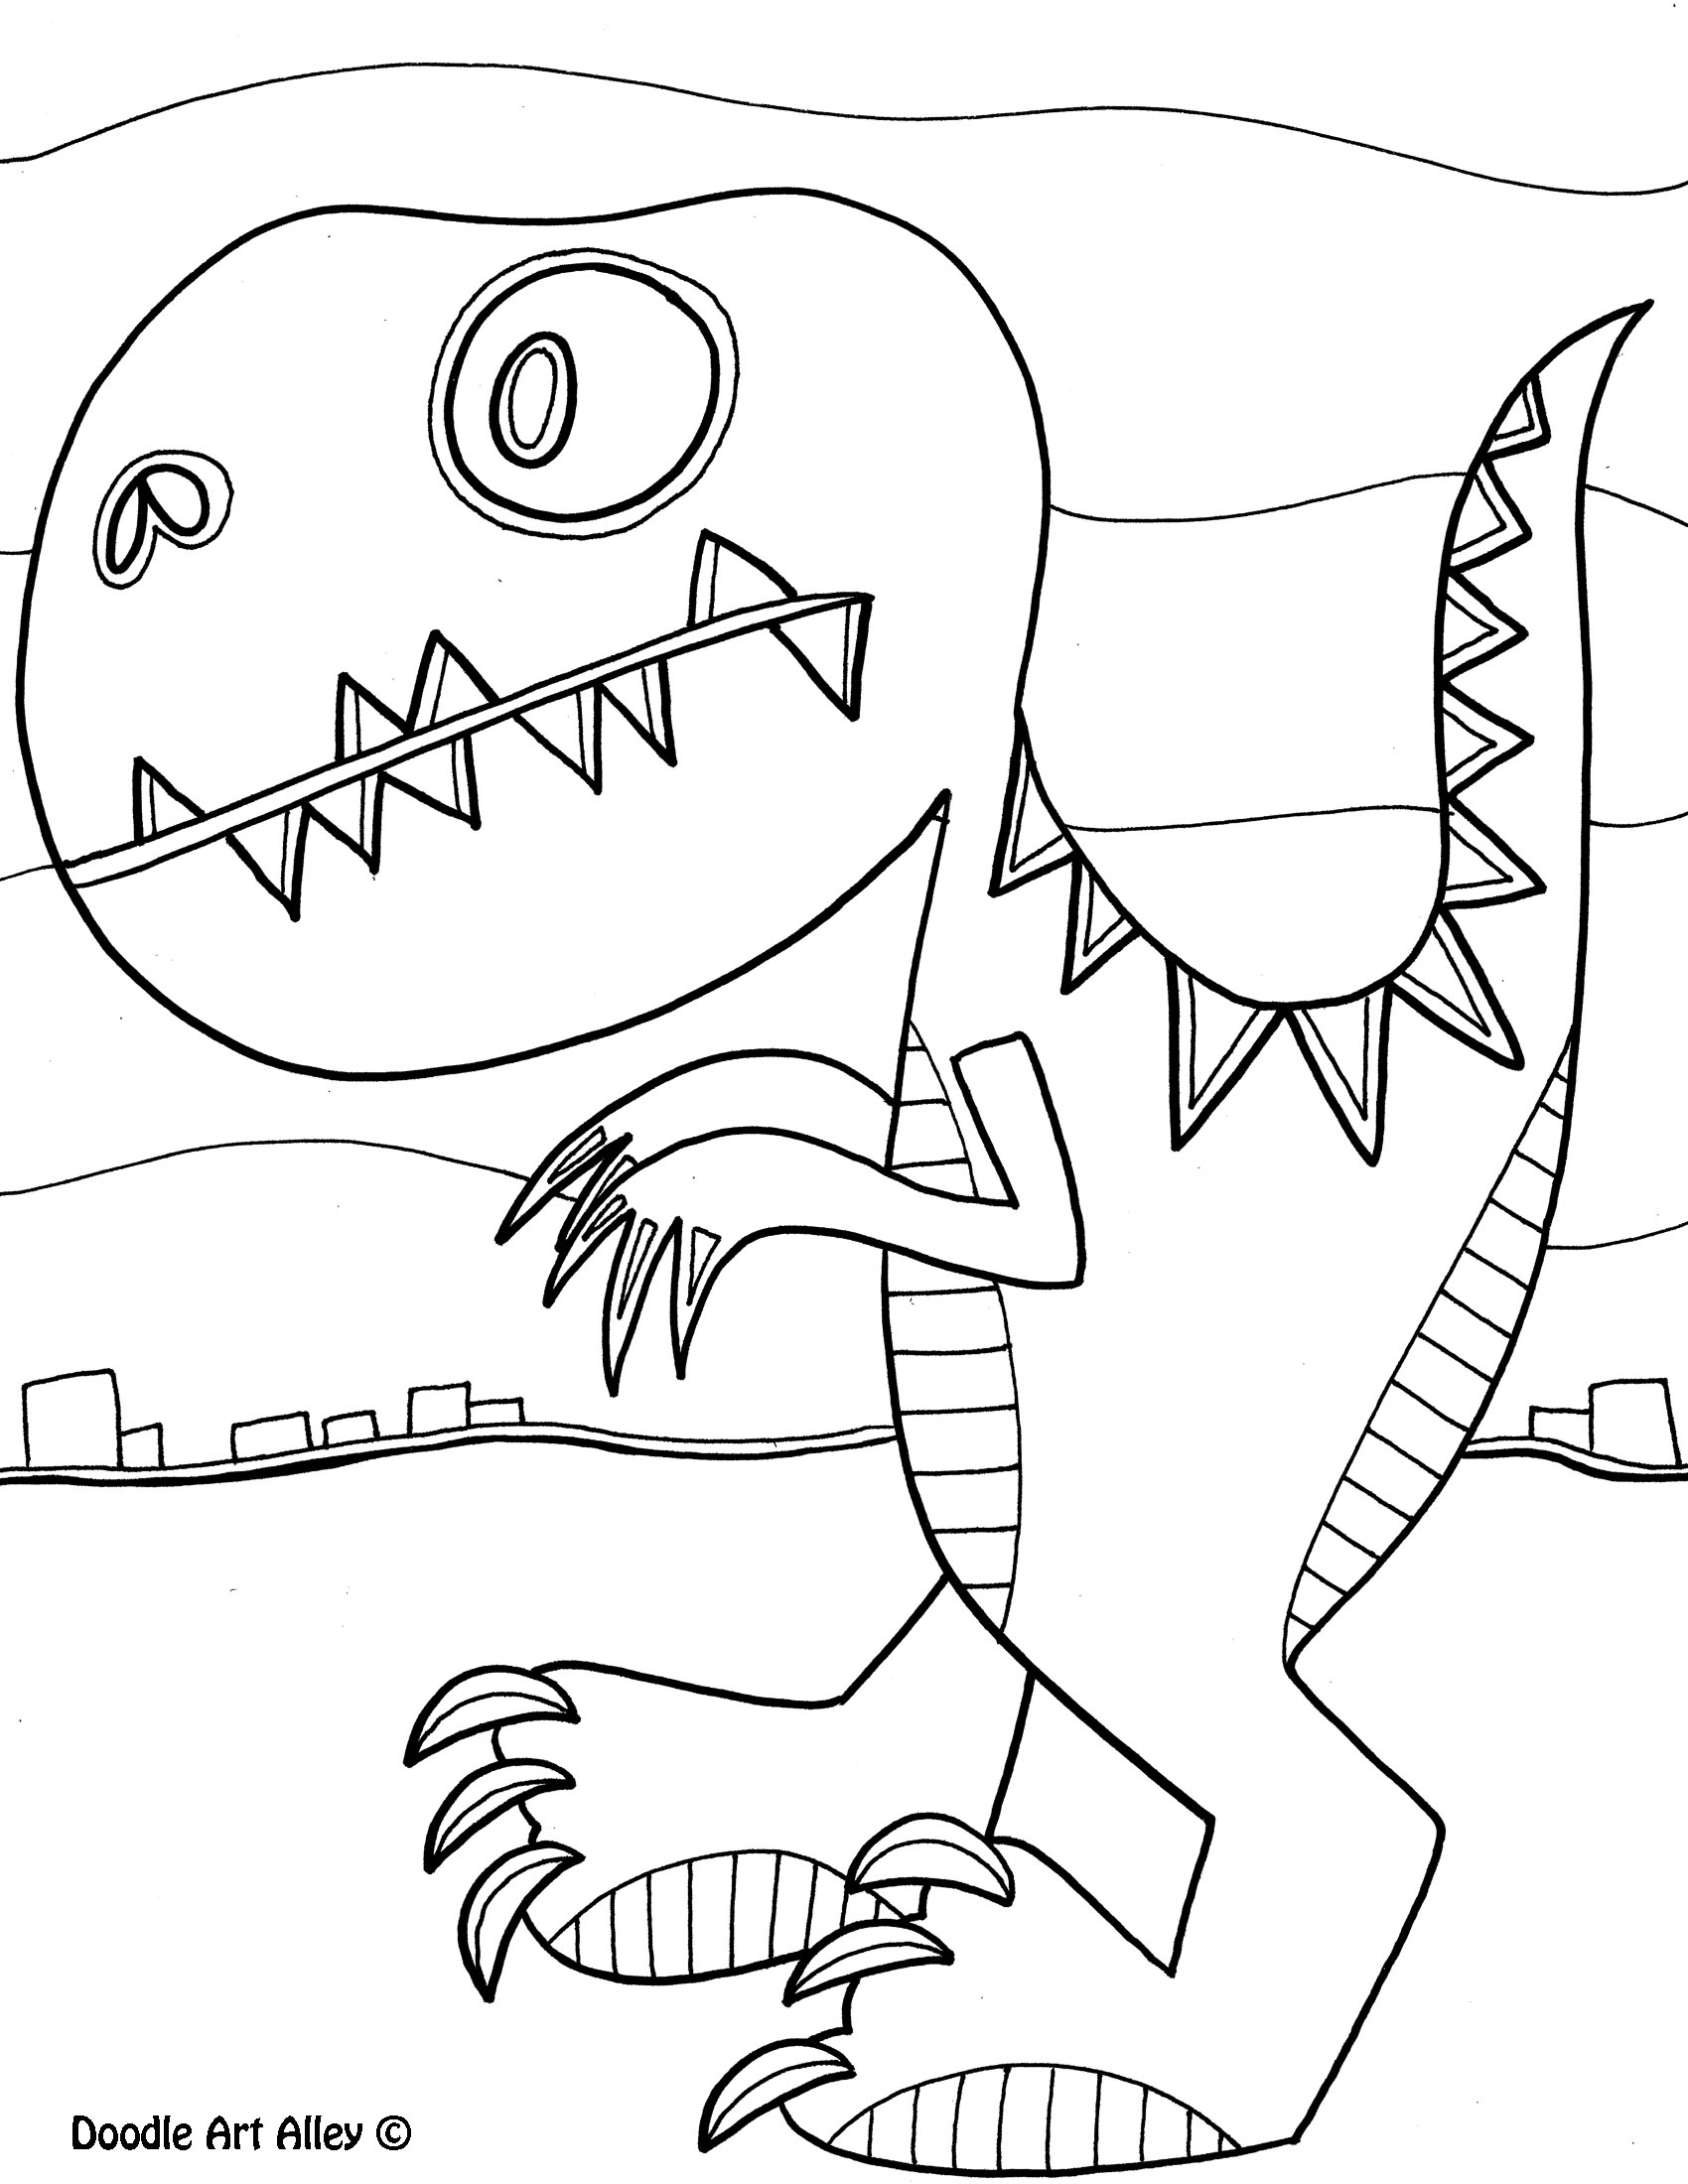 Dinosaur Coloring pages - Doodle Art Alley